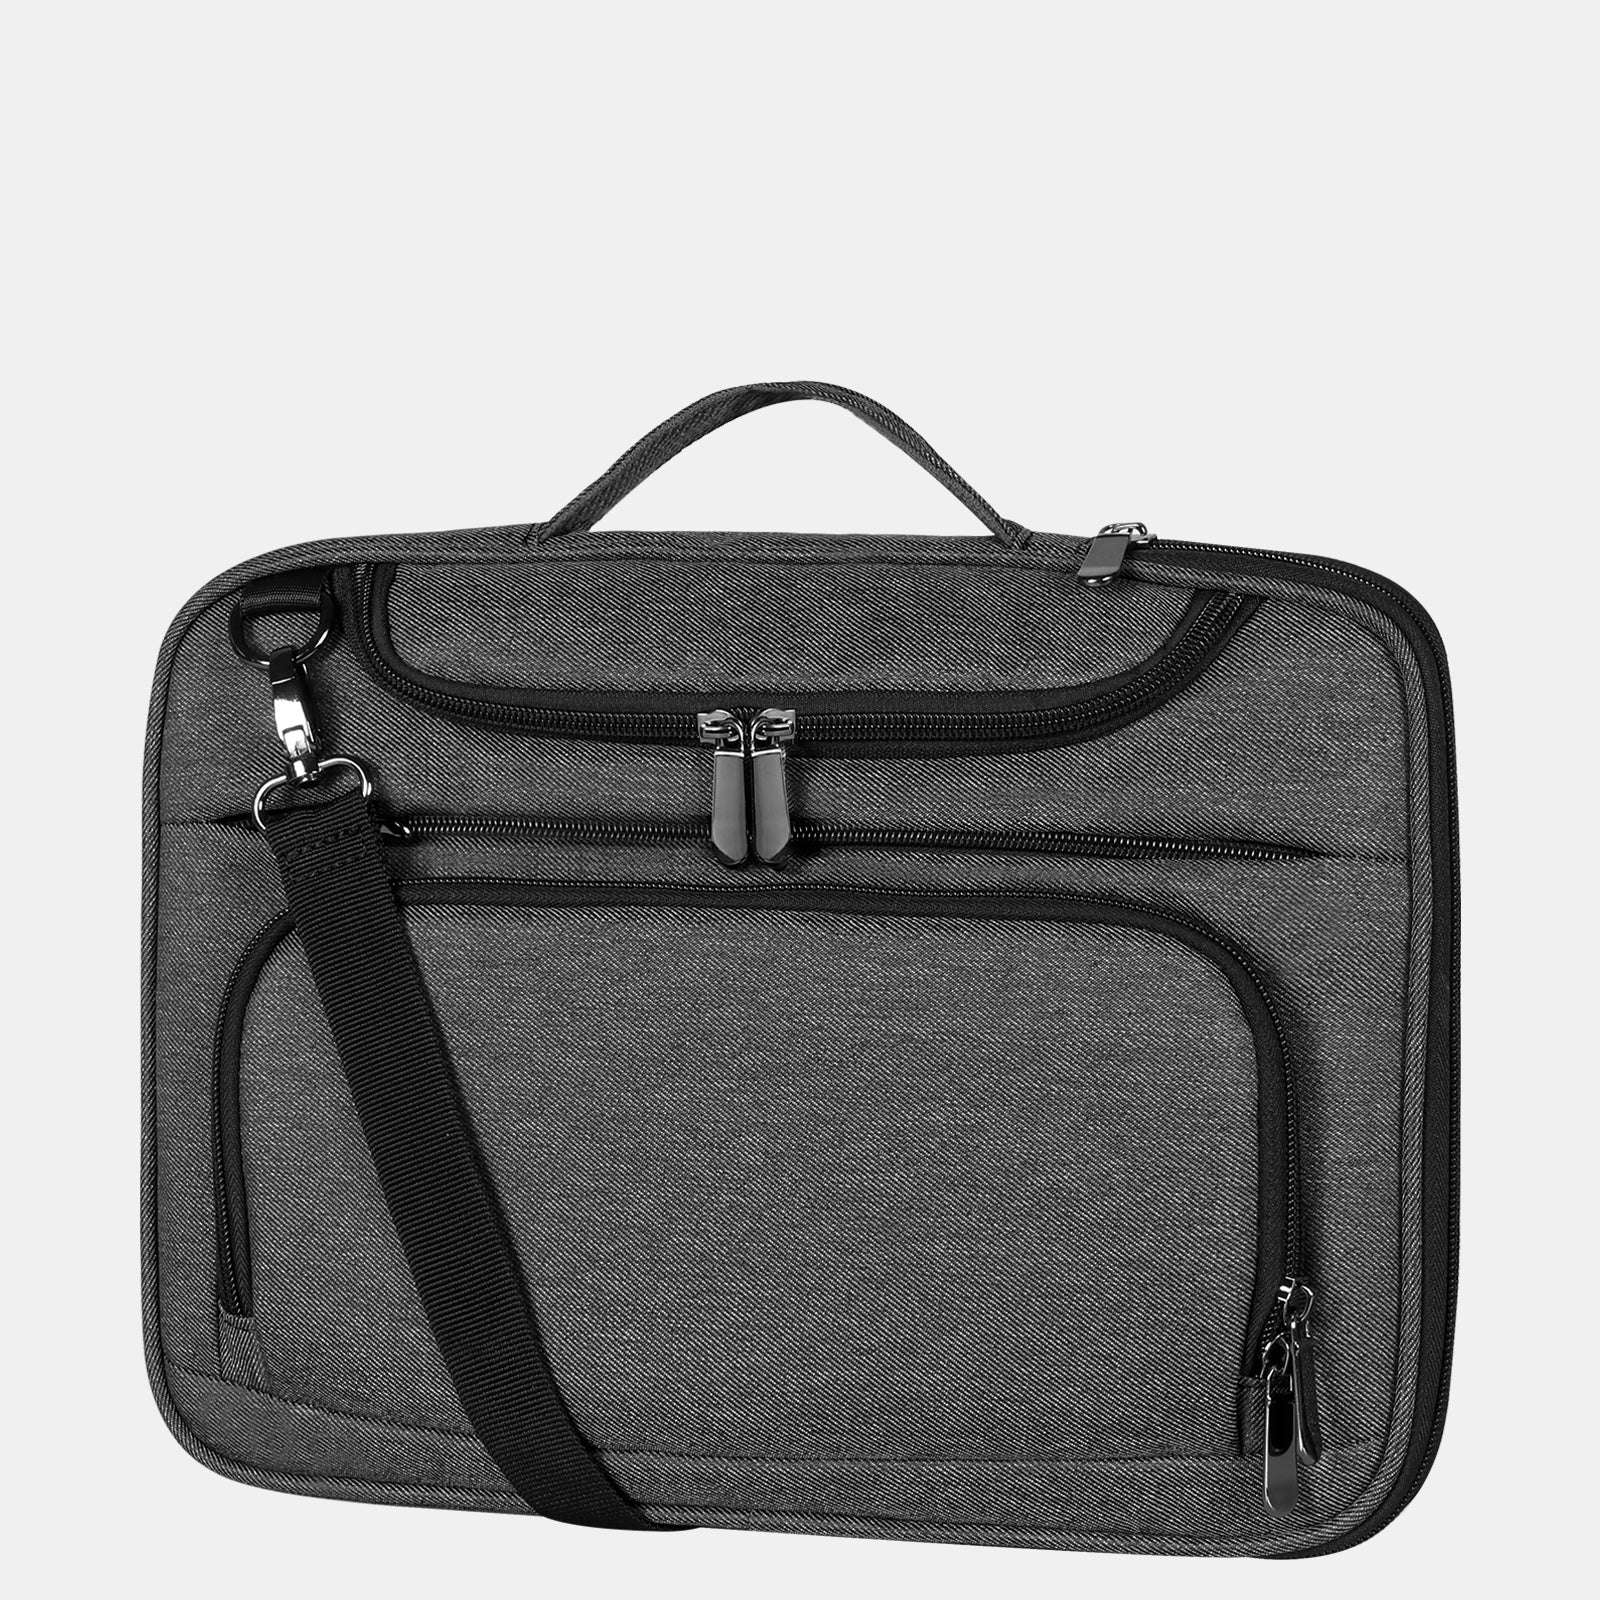 Bertasche 13 inch Tablet Sleeve Bag with Strap